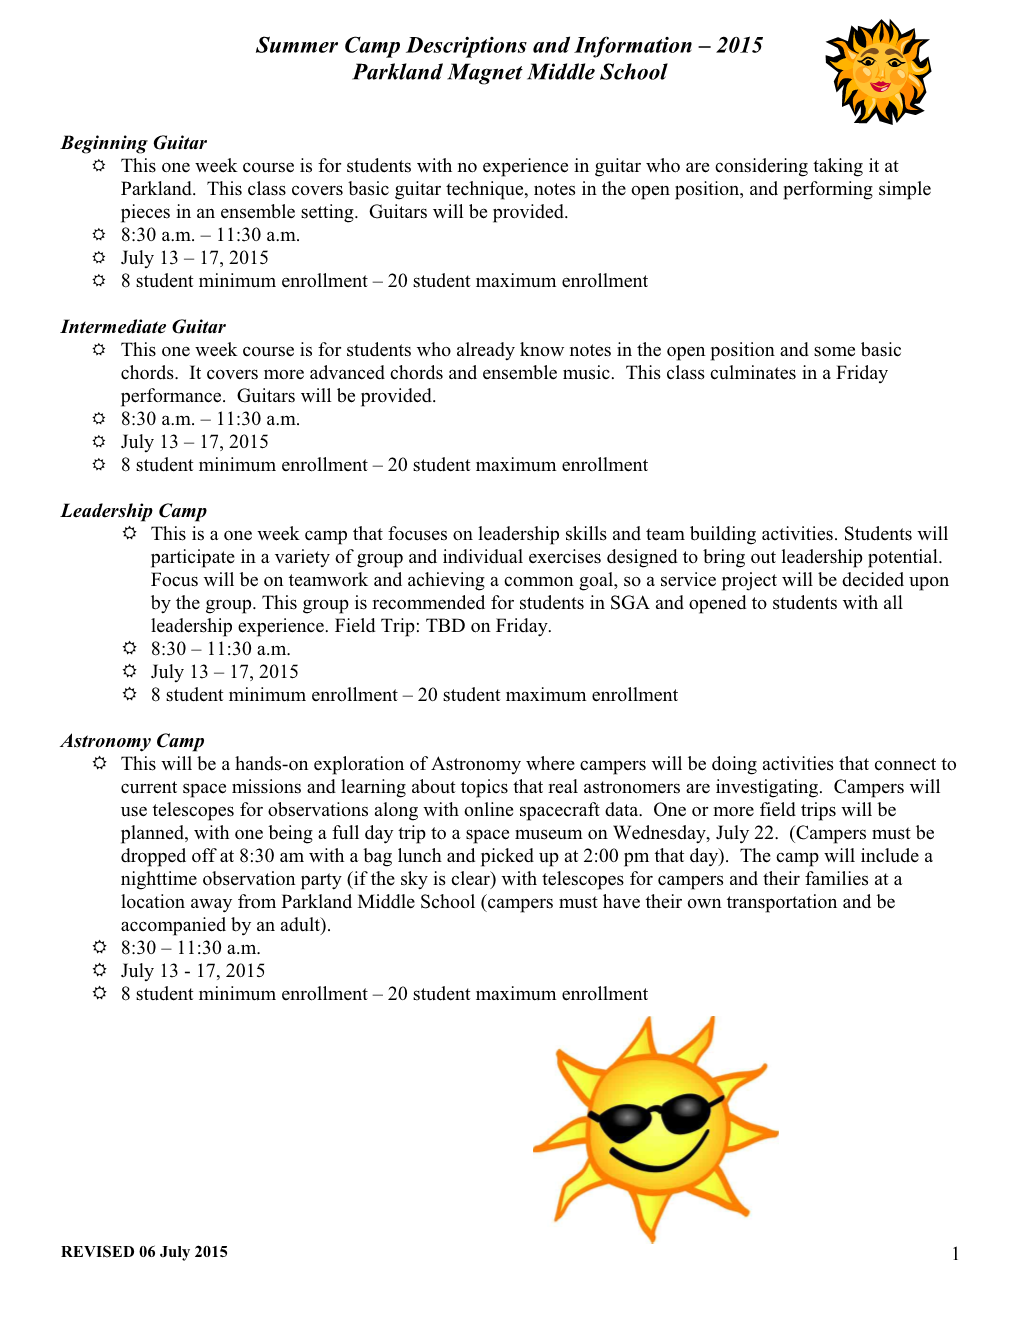 Summer Camp Descriptions and Information 2011